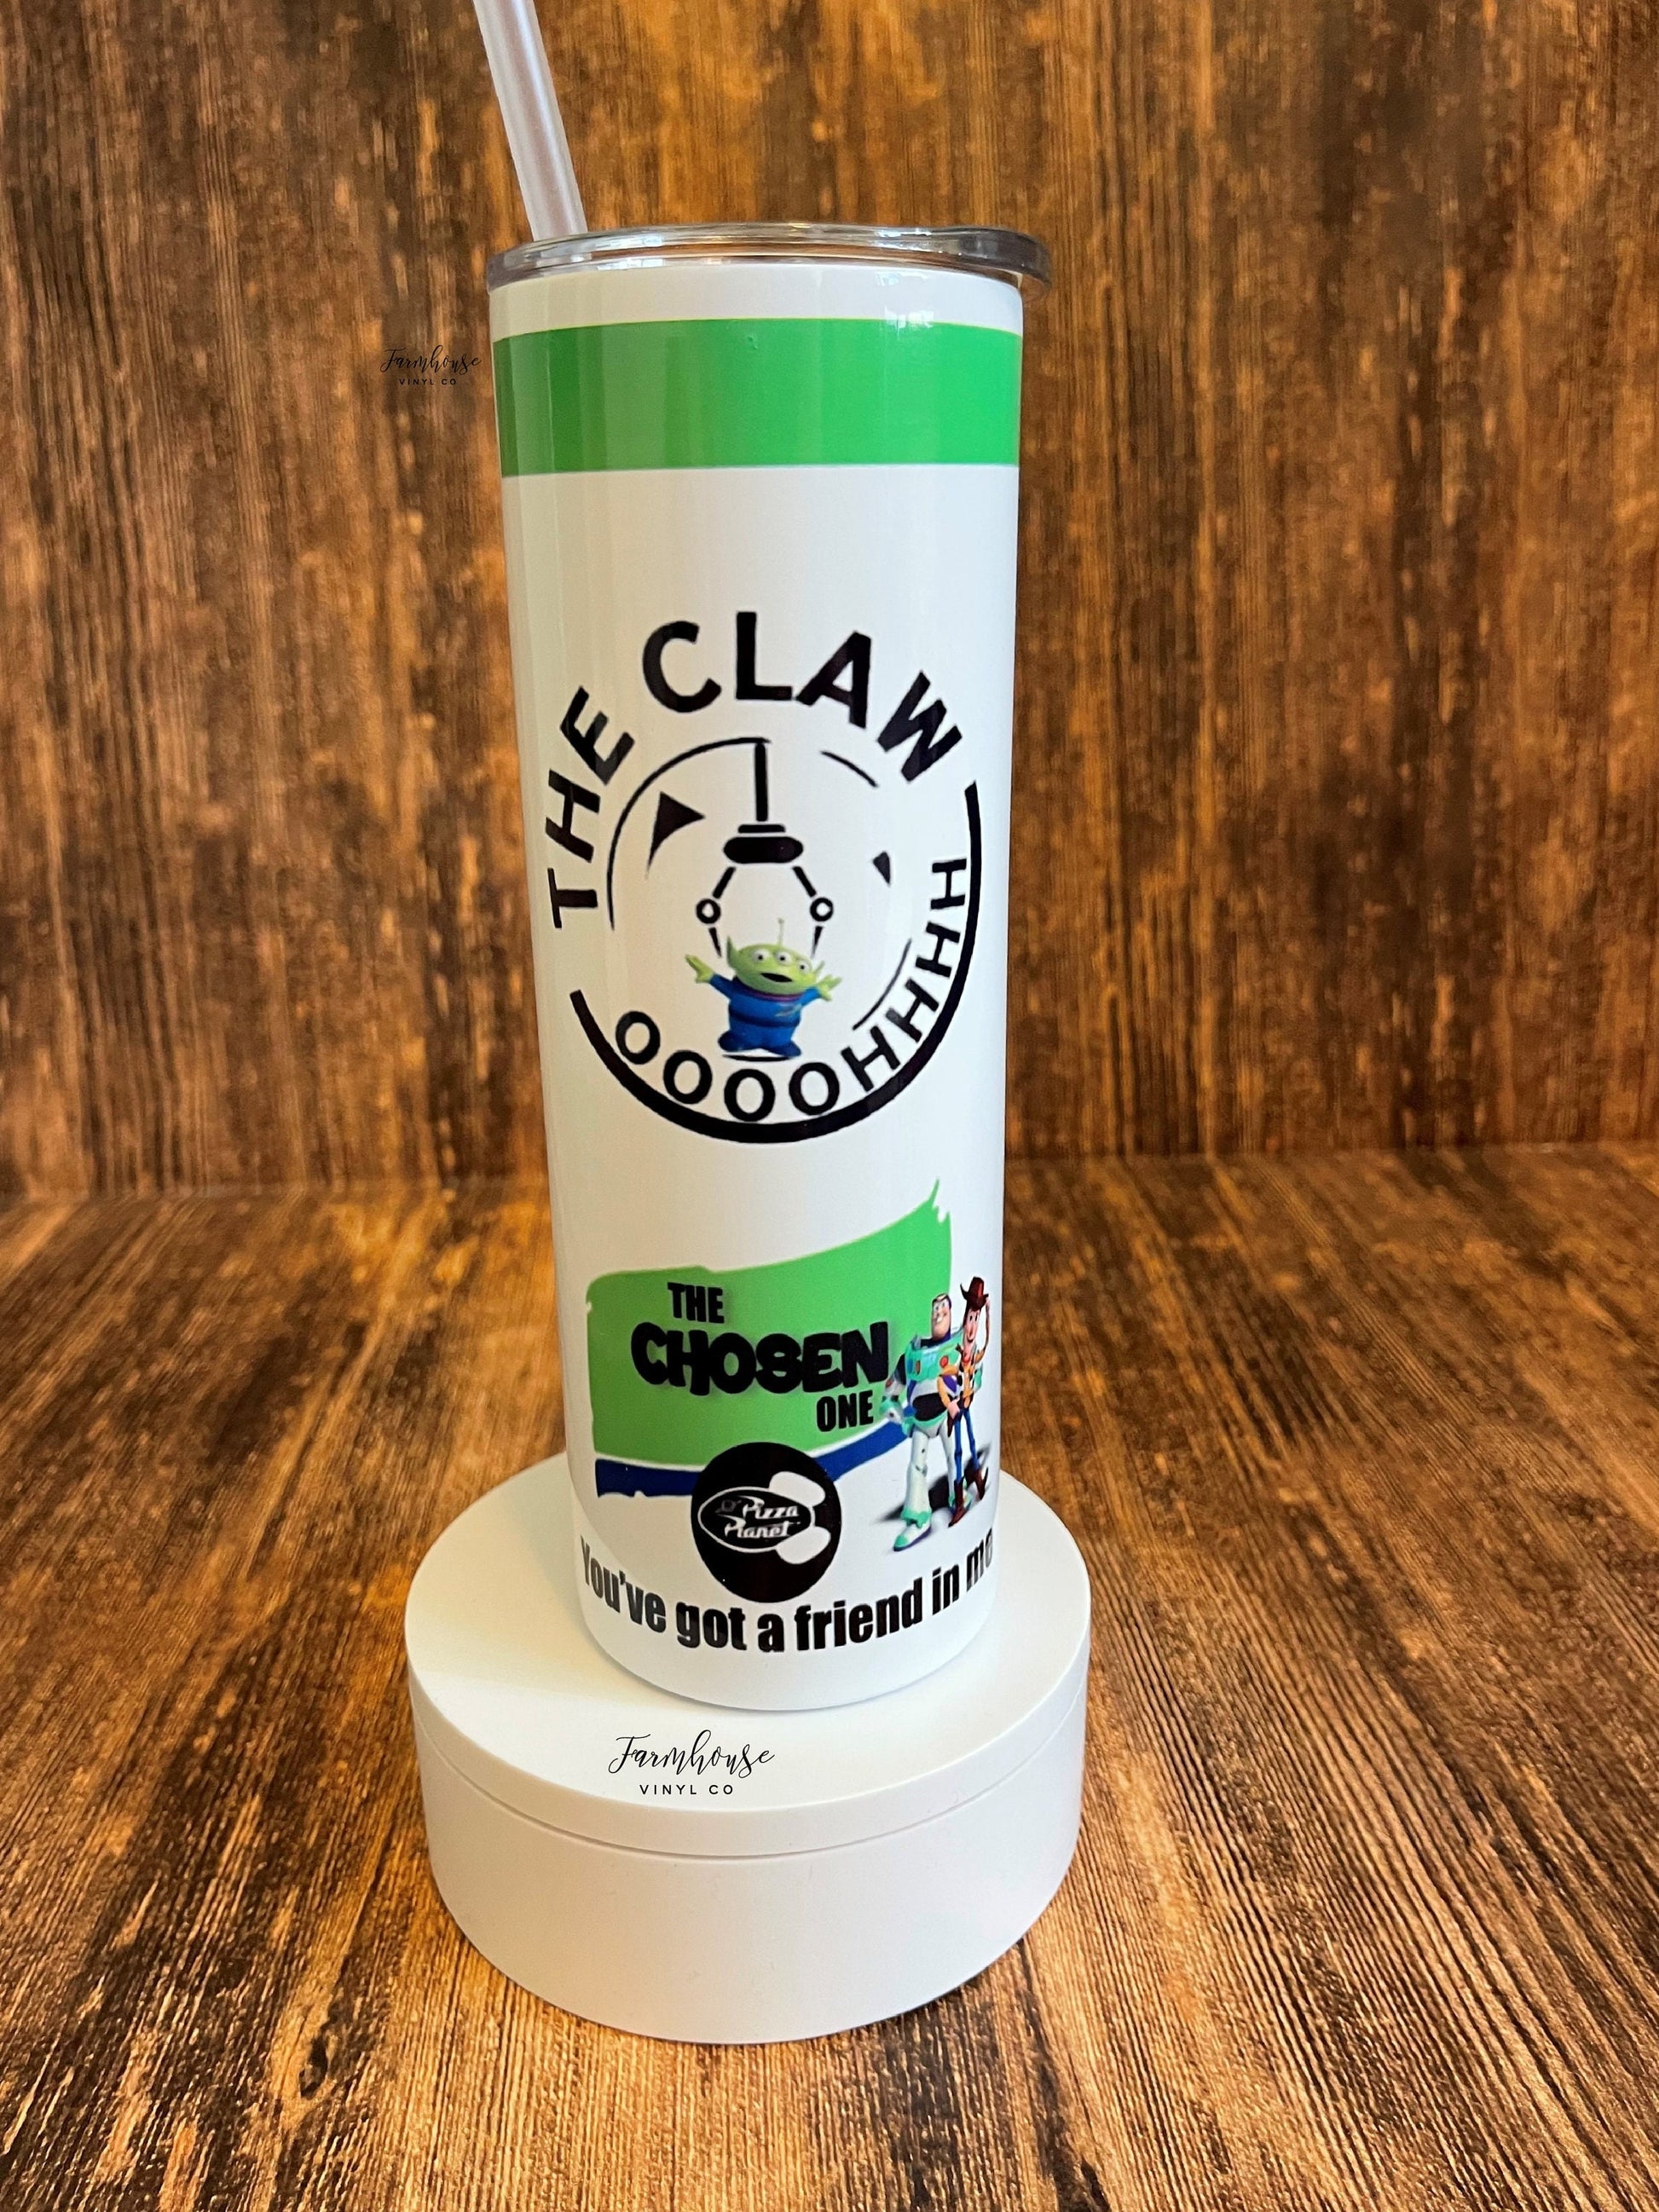 Funny Toy The Claw 20oz Tumbler / Magical Vacation Cup / The Chosen One Tumbler / Cowboy Space Ranger Alien Tumbler / Toy Fan Tumbler Cup - Farmhouse Vinyl Co